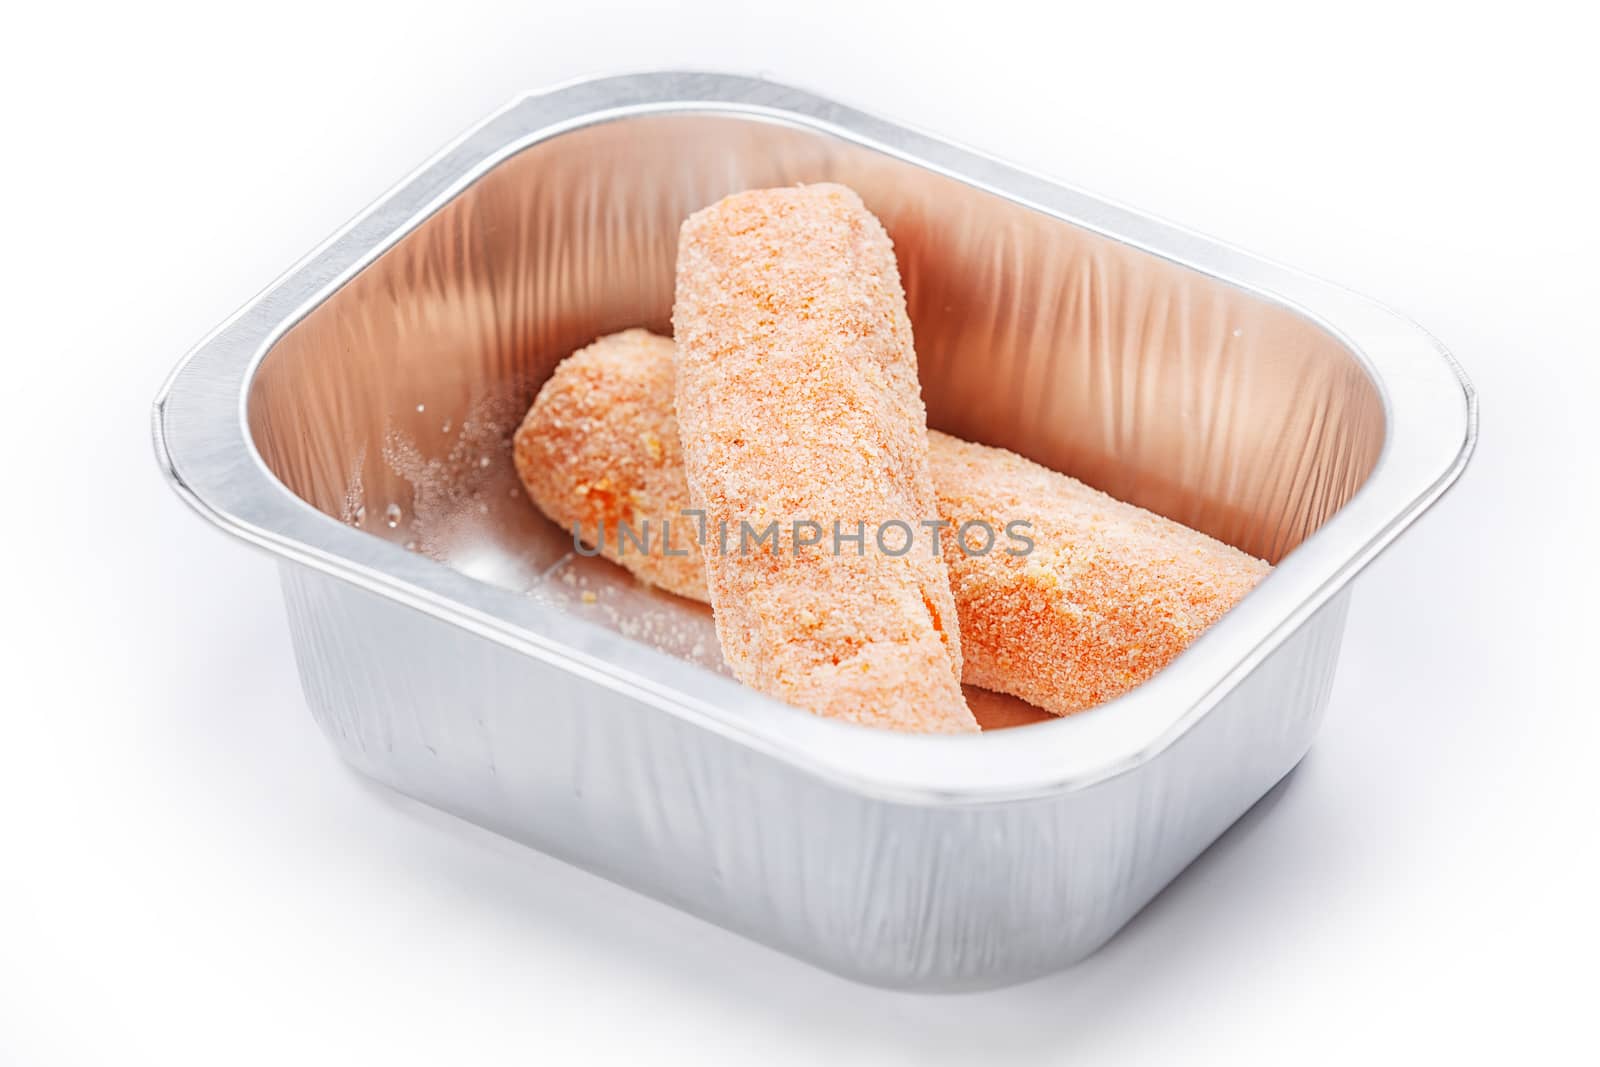 Portion of food in the container isolated on white